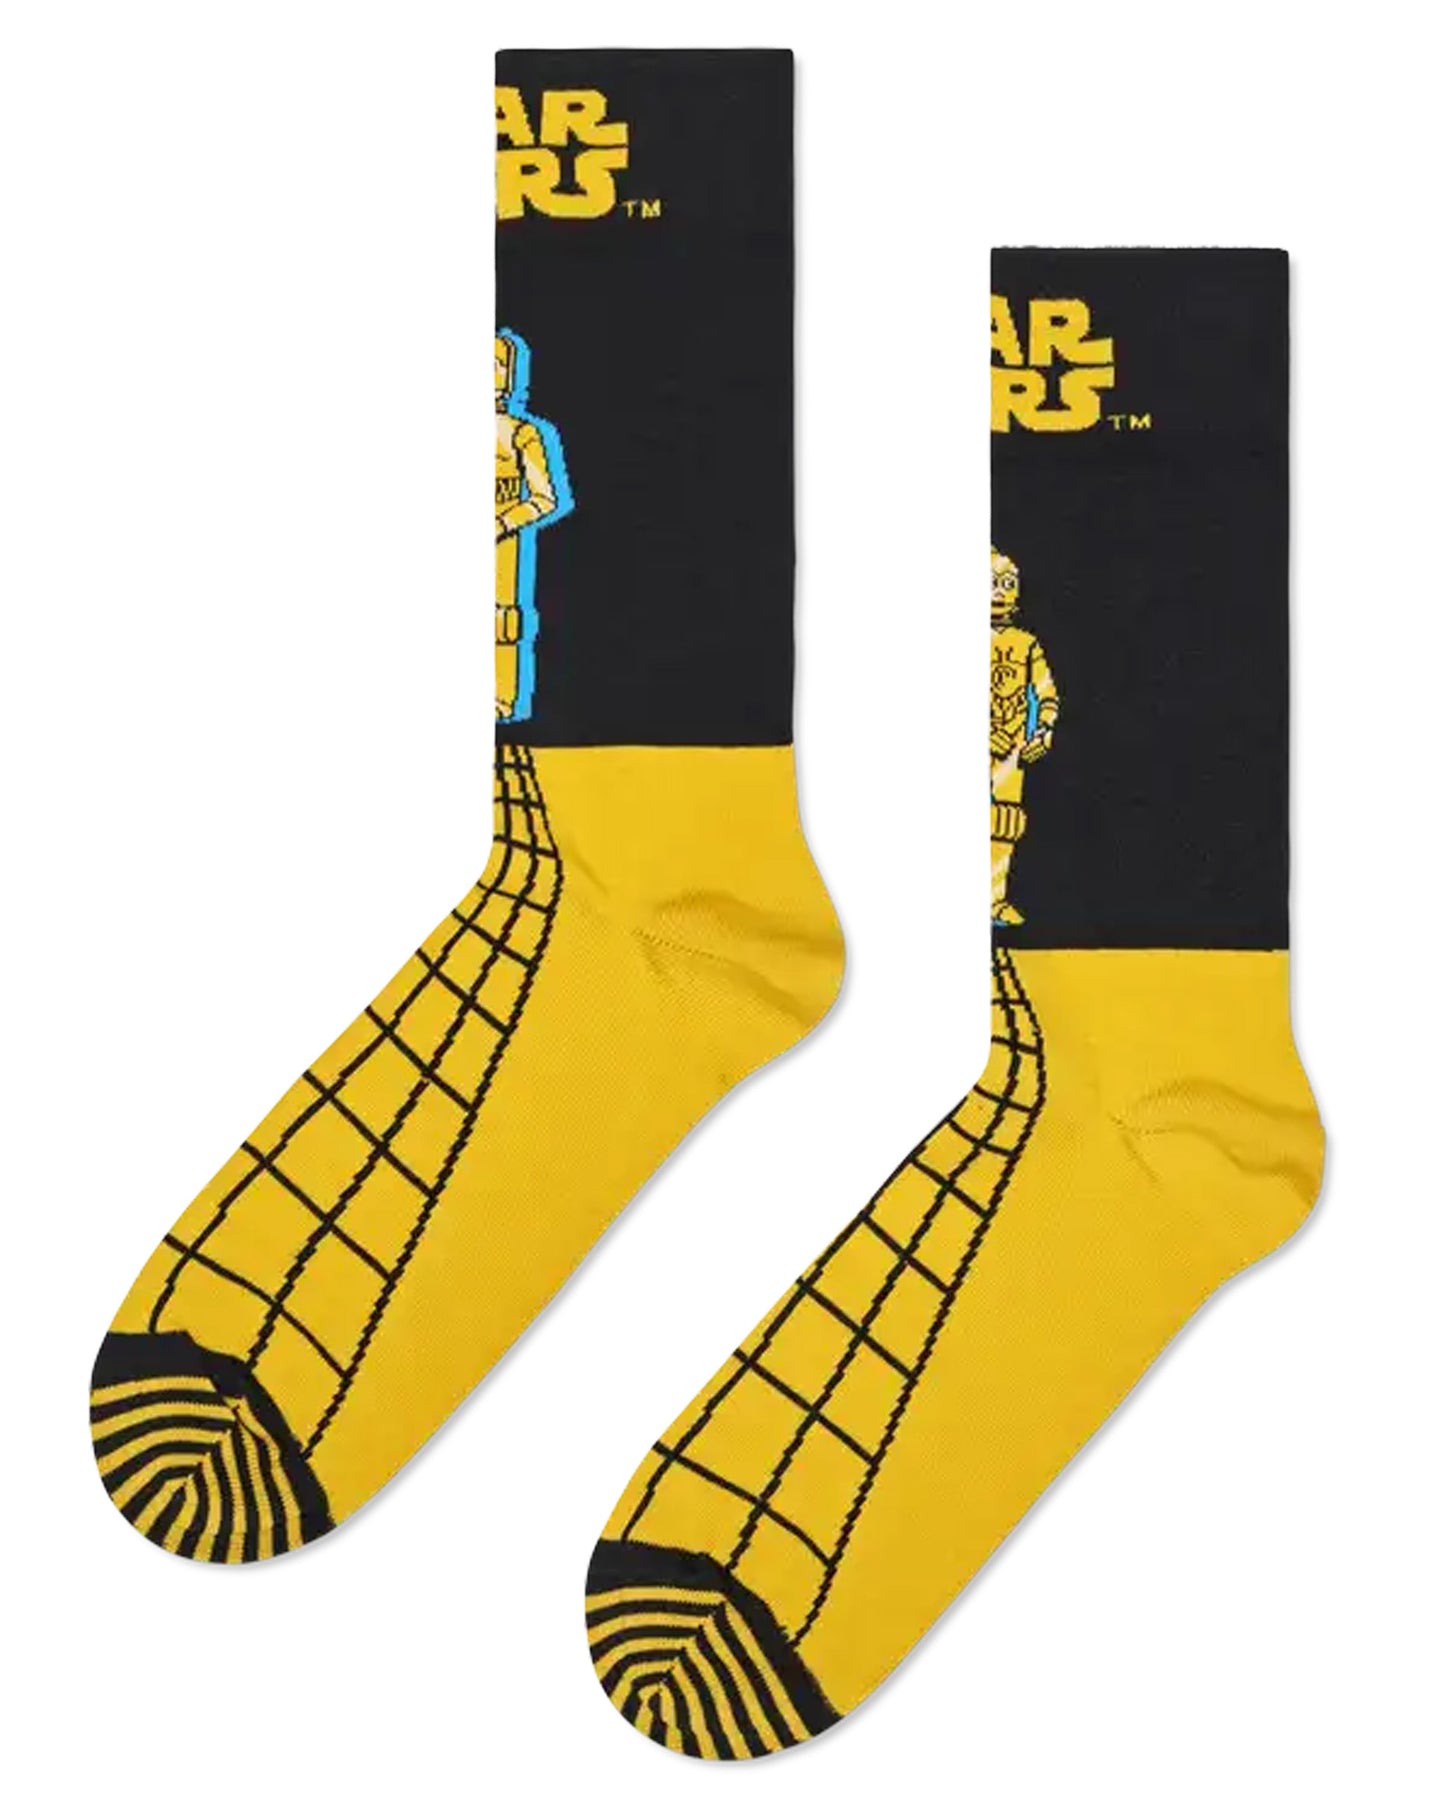 Happy Socks P000273 C-3PO Sock - Star wars themed cotton socks in navy and yellow with C-3PO robot motif.Cotton crew length socks with Star War's logo and C-3PO robot motif in yellow with a turquoise blue shadow on a black background and the bottom half is yellow with a lack linear pattern.